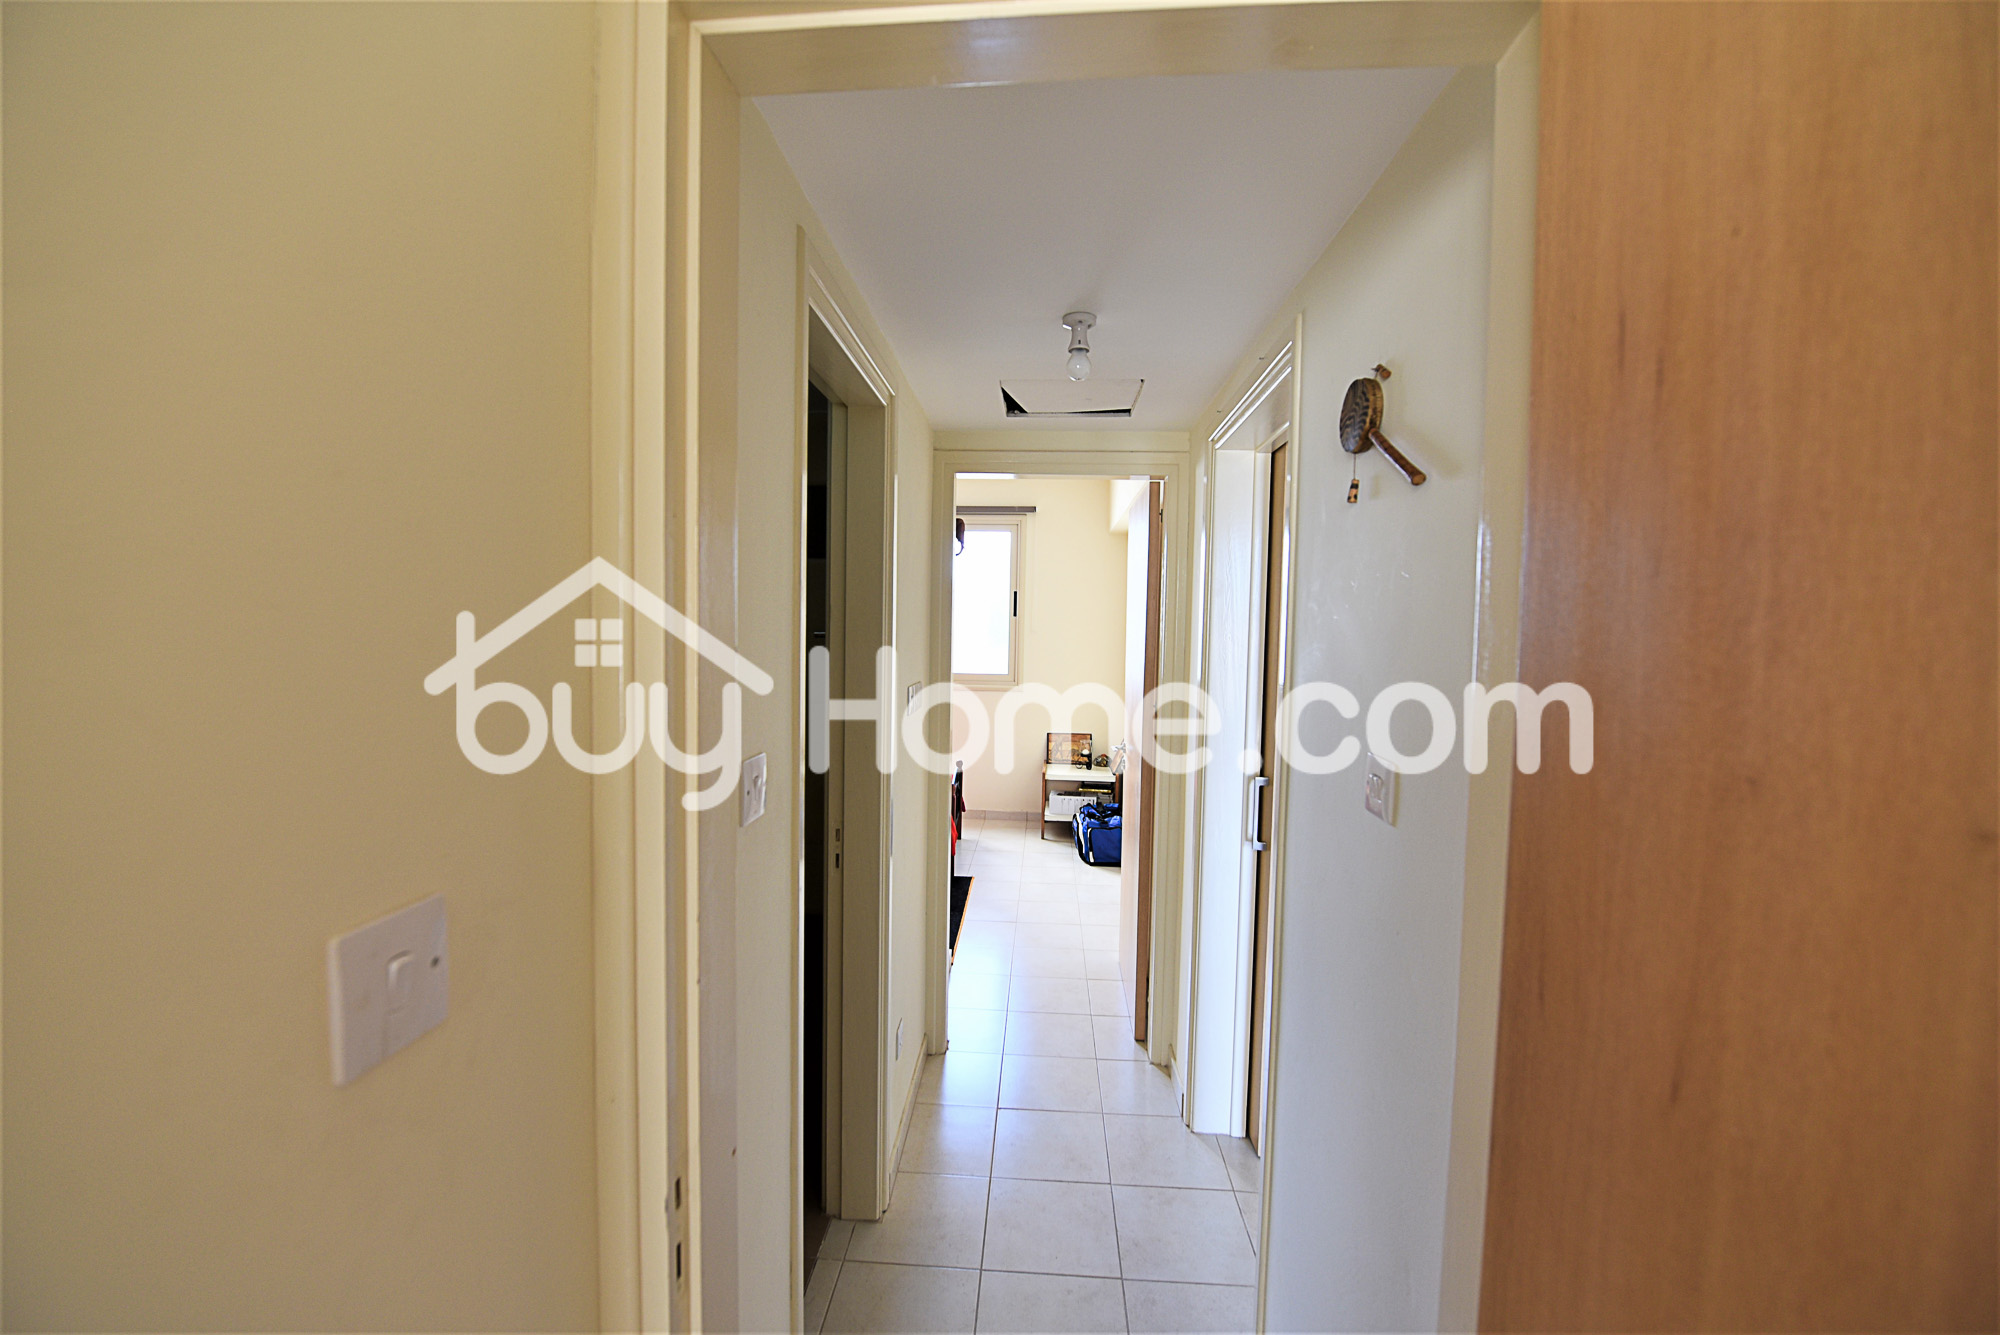 2 Bedroom Apartment | BuyHome